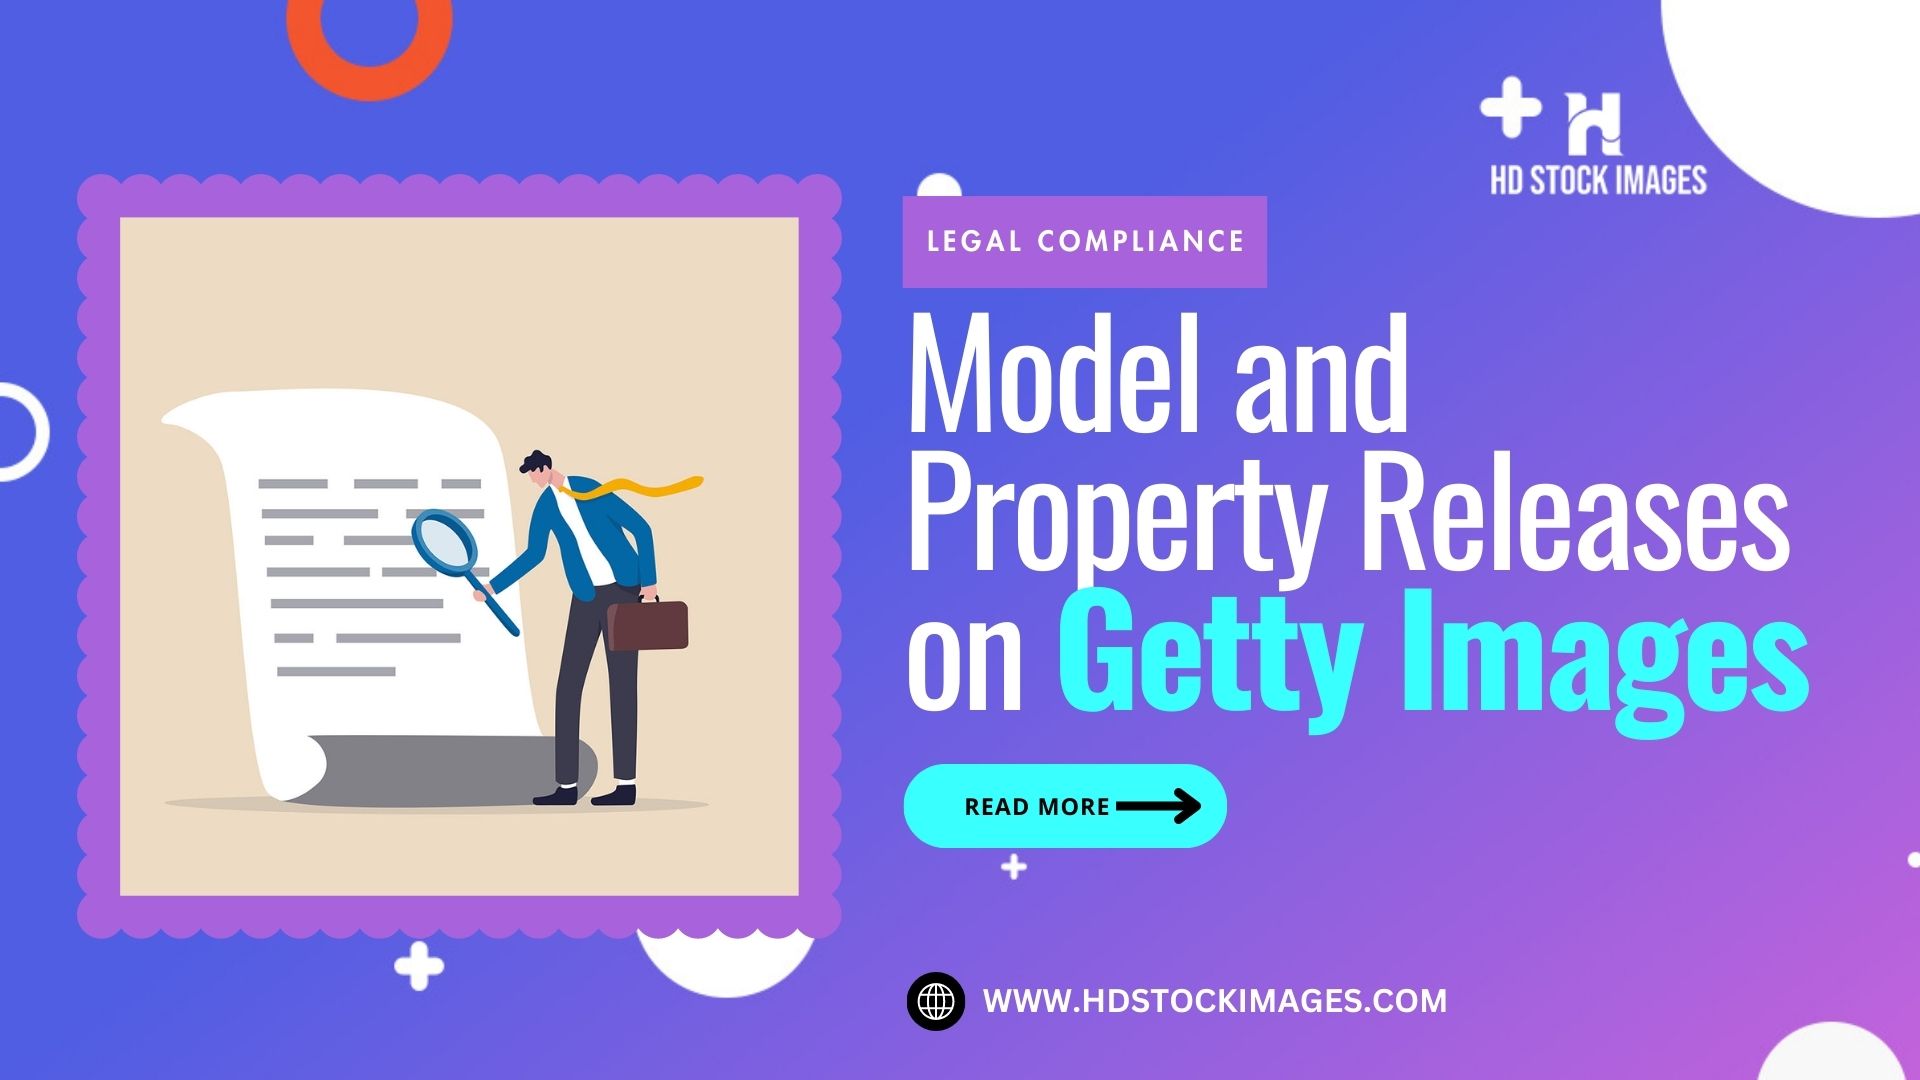 An image of Navigating Model and Property Releases on Getty Images: Ensuring Legal Compliance